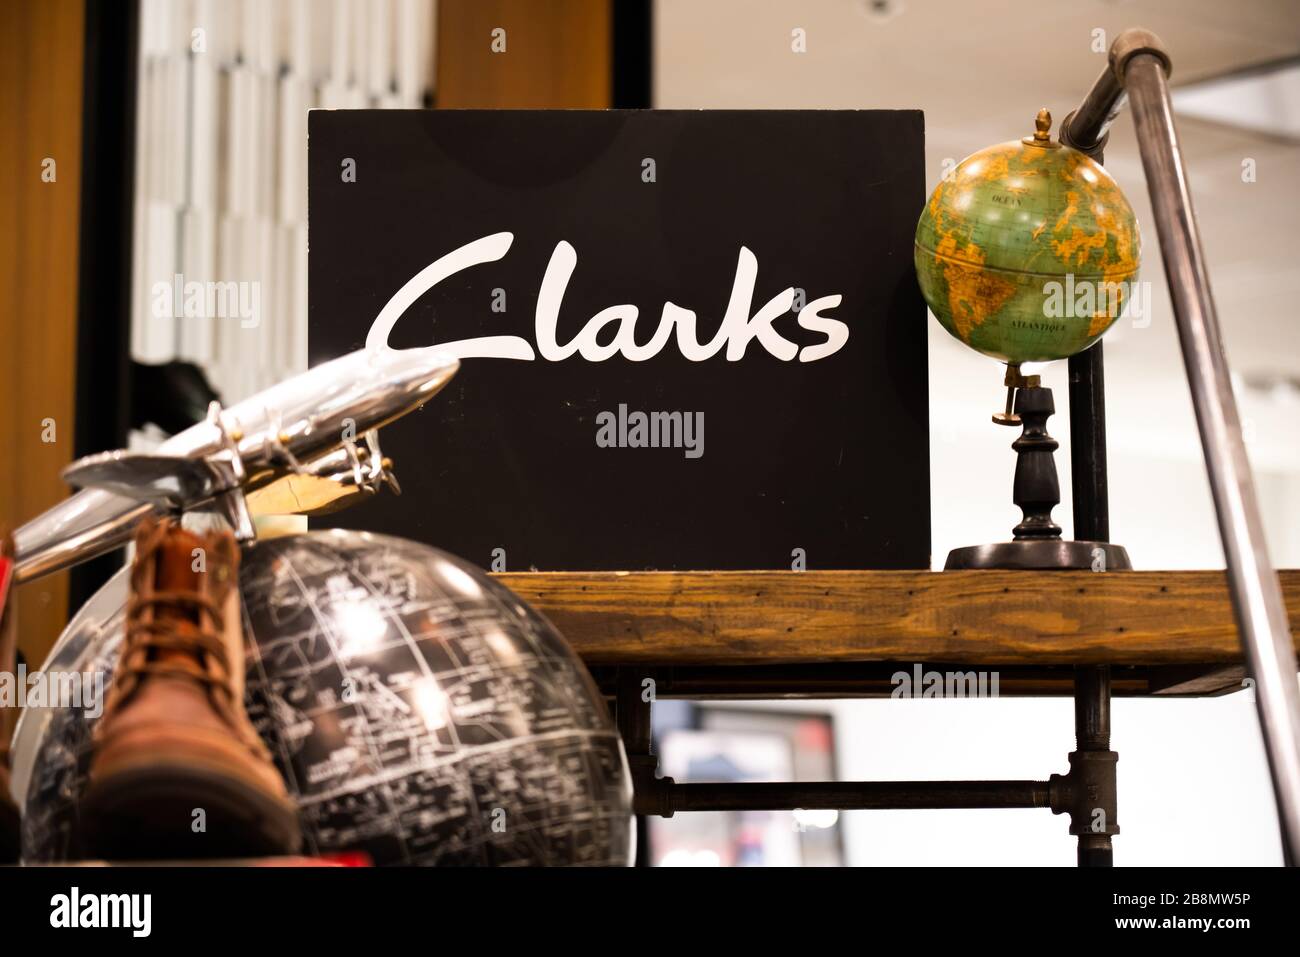 clarks shoe store nyc